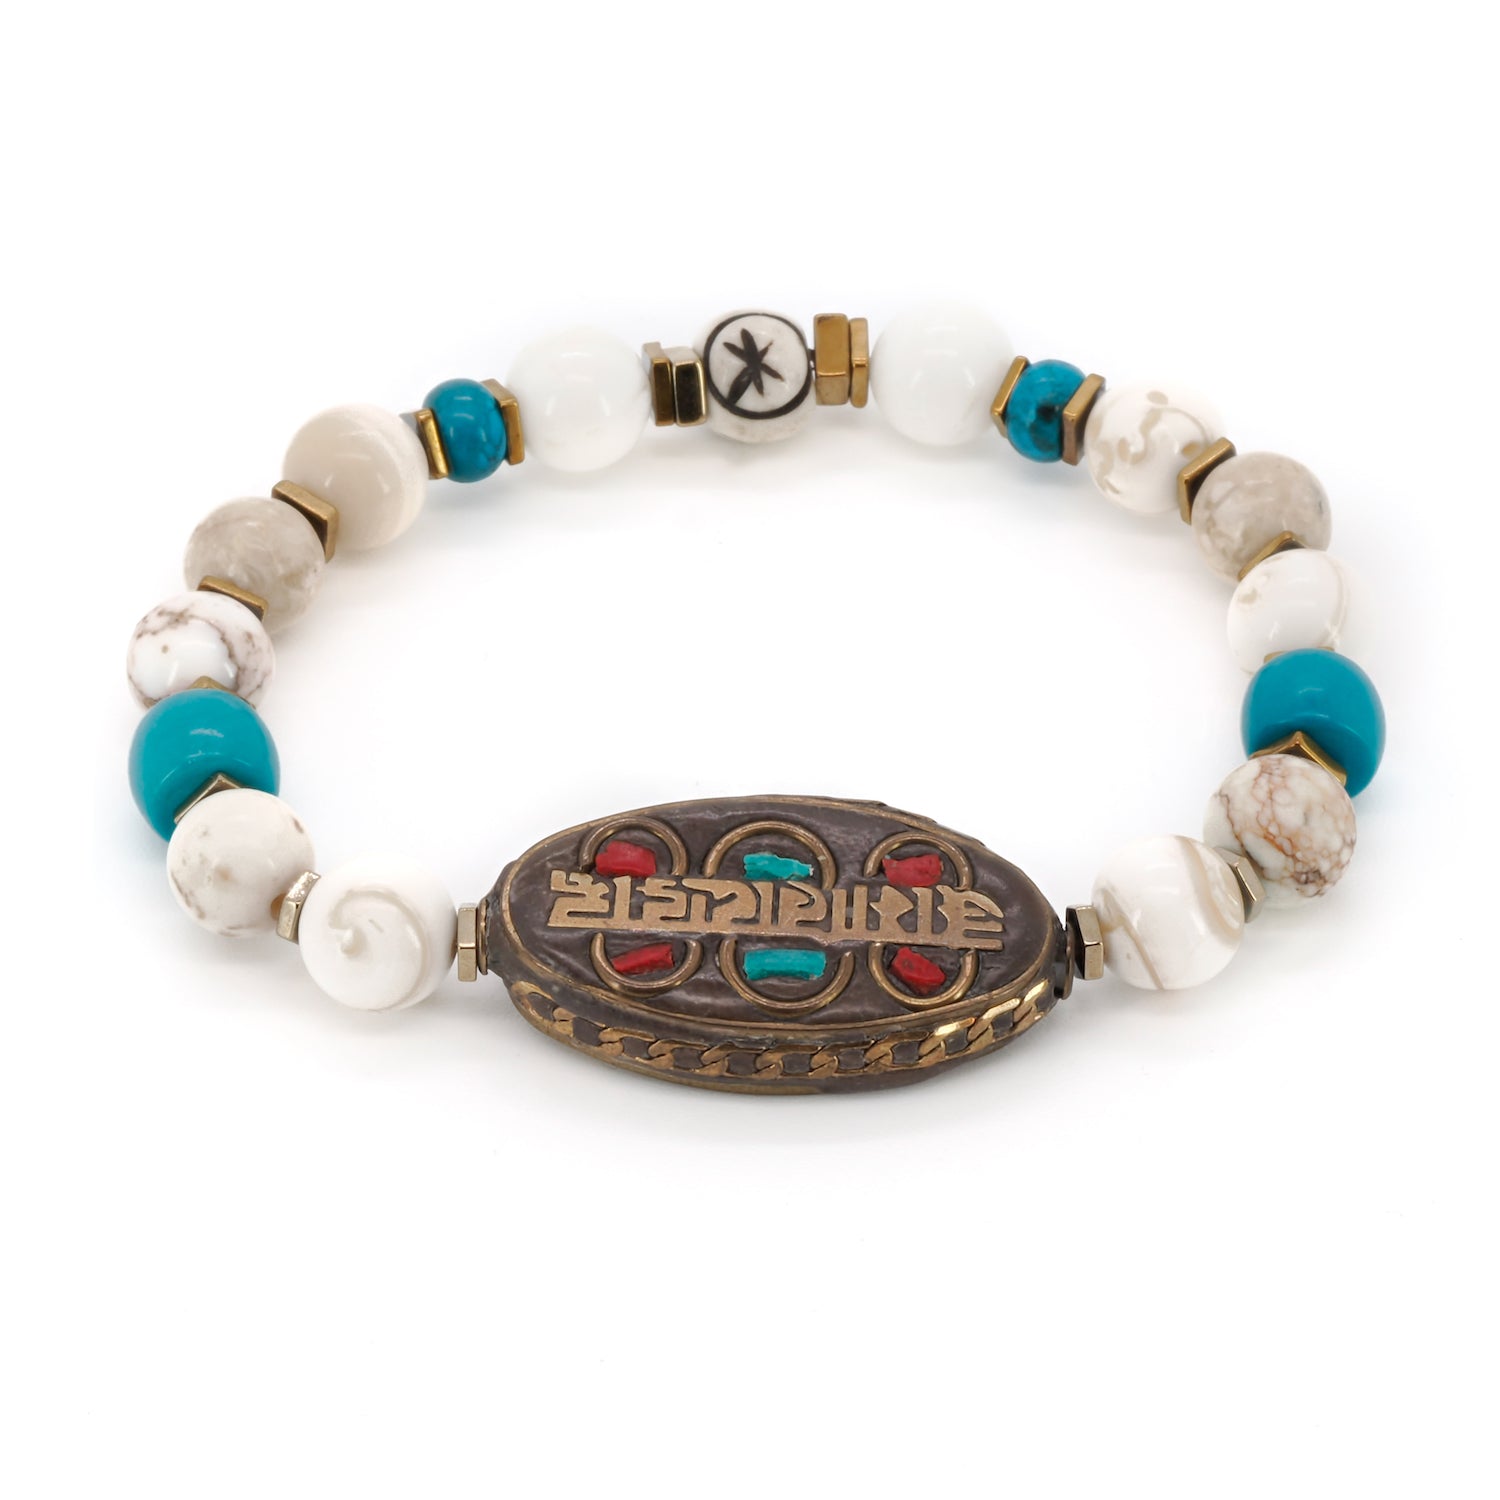 Embrace the spiritual traditions of Nepal with the Om Mani Padme Hum Nepal Bracelet, featuring Nepal agate beads and a mantra centerpiece.